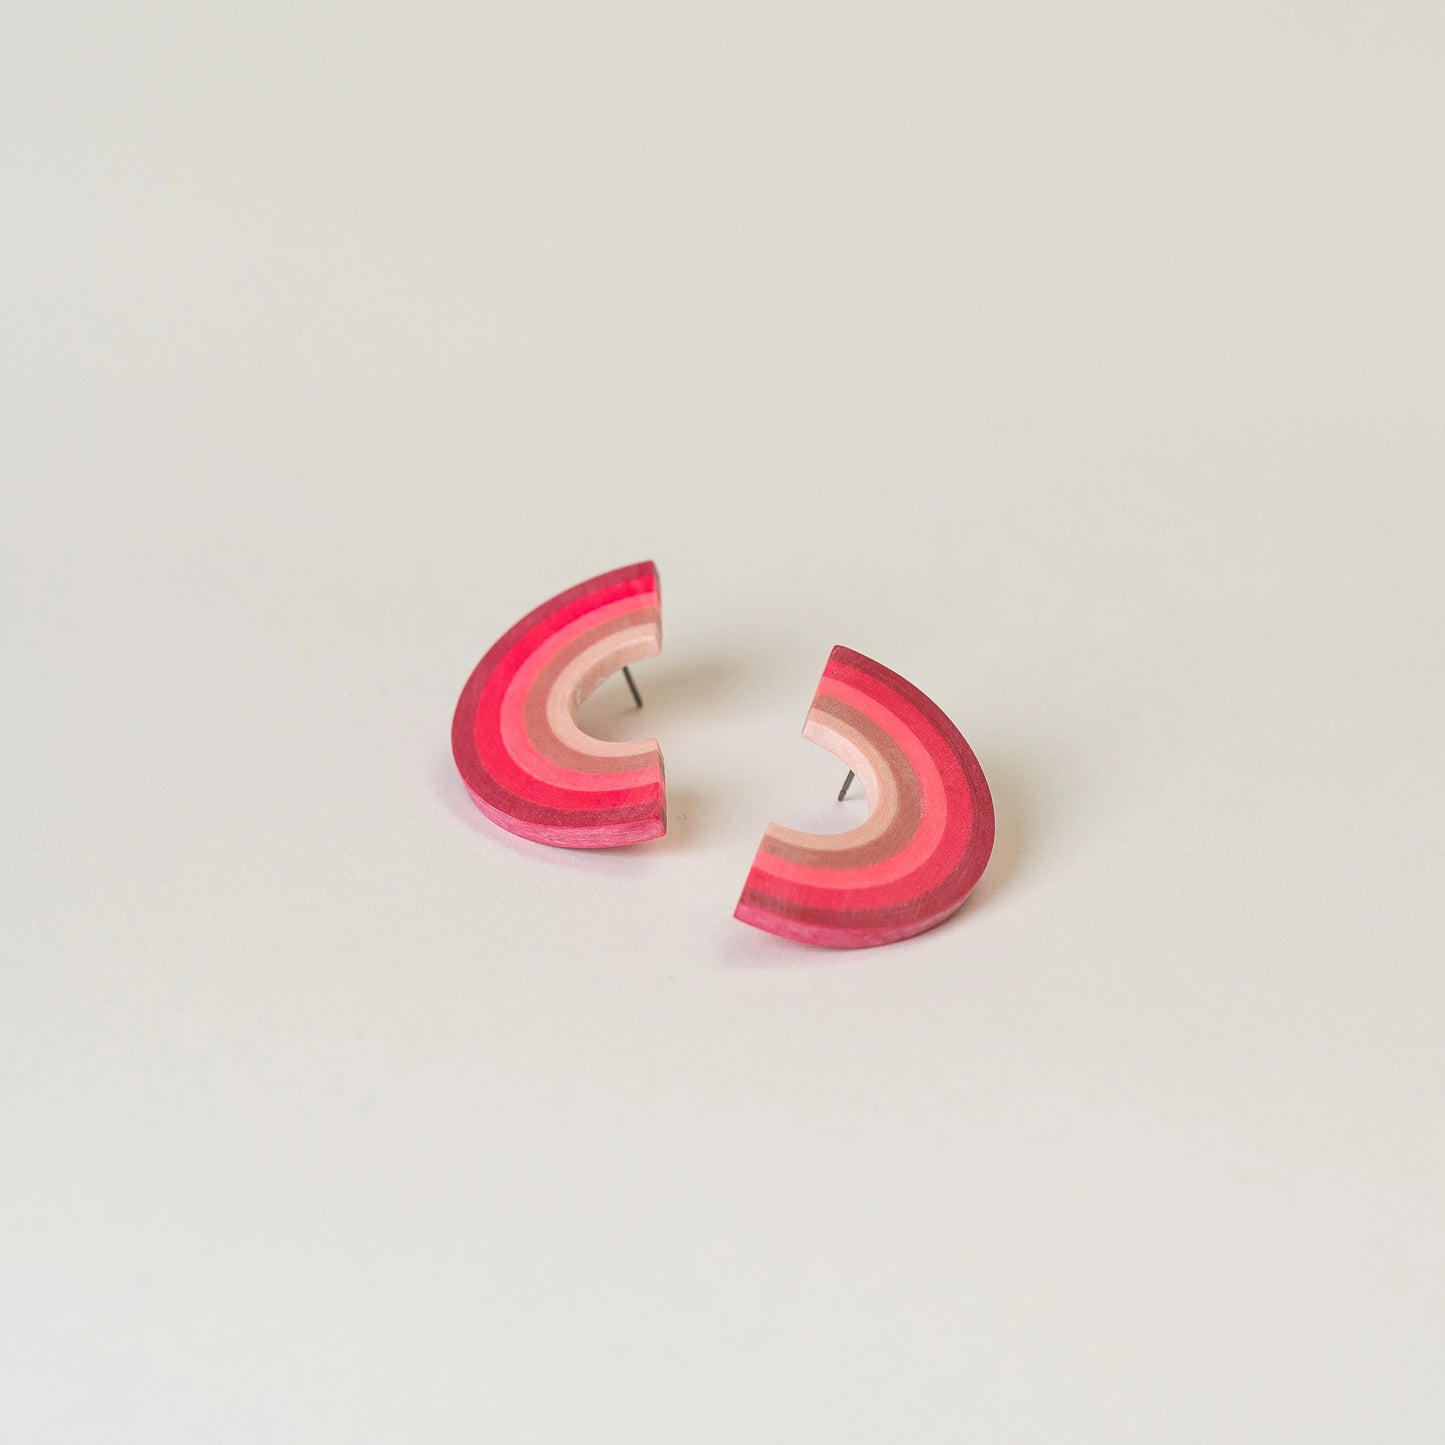 Earrings made from compressed paper with a titanium stud in pink.